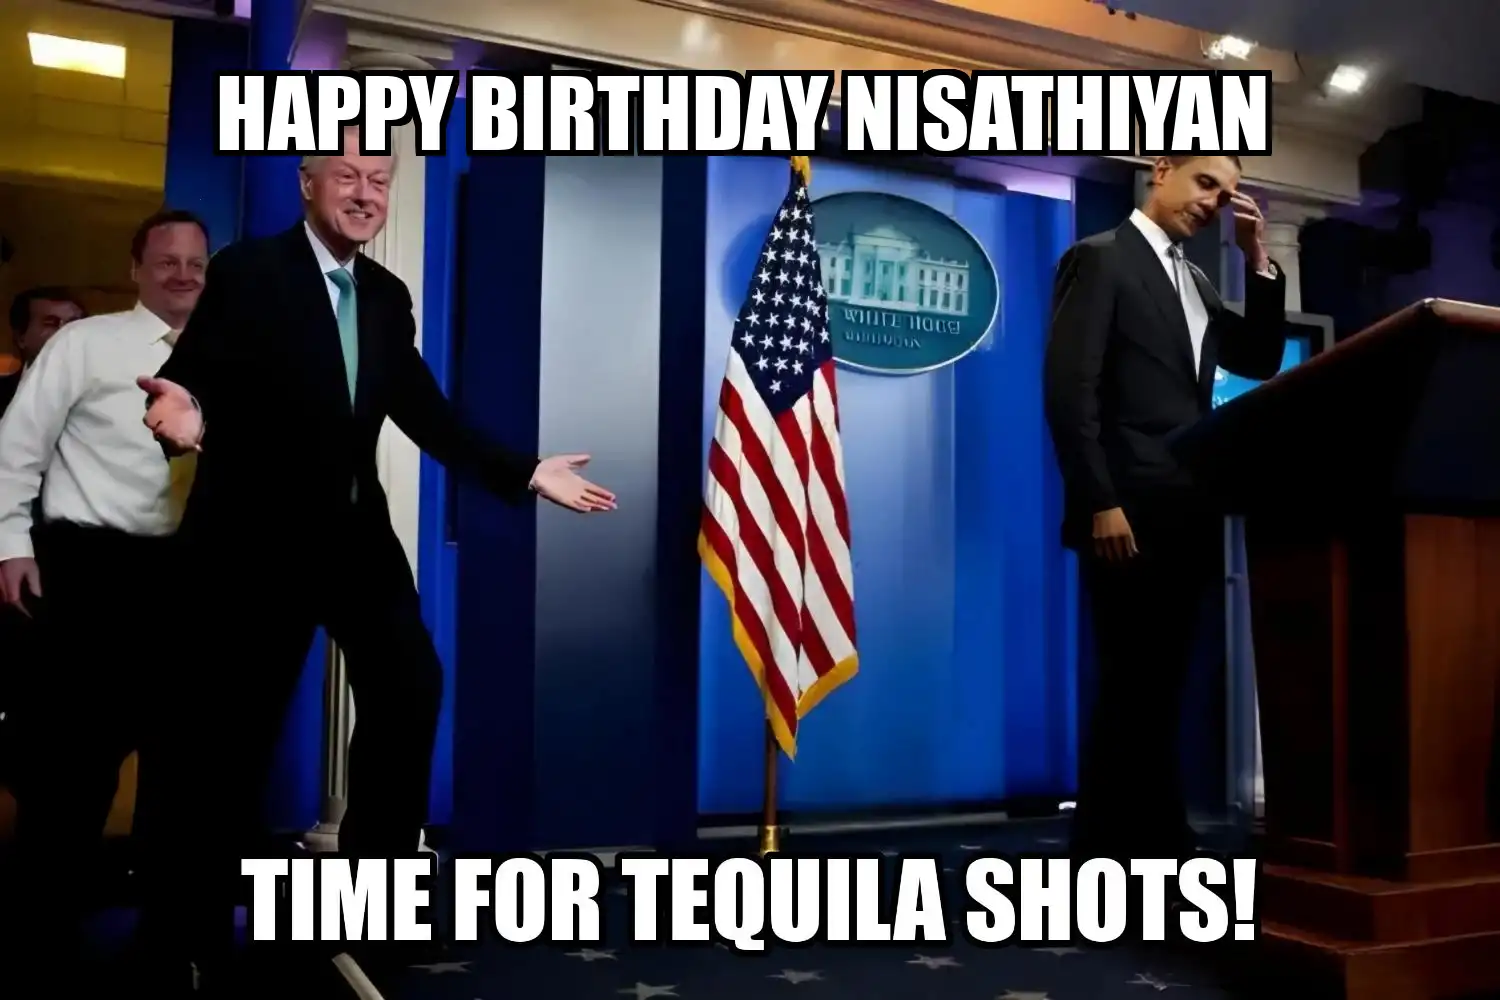 Happy Birthday Nisathiyan Time For Tequila Shots Memes